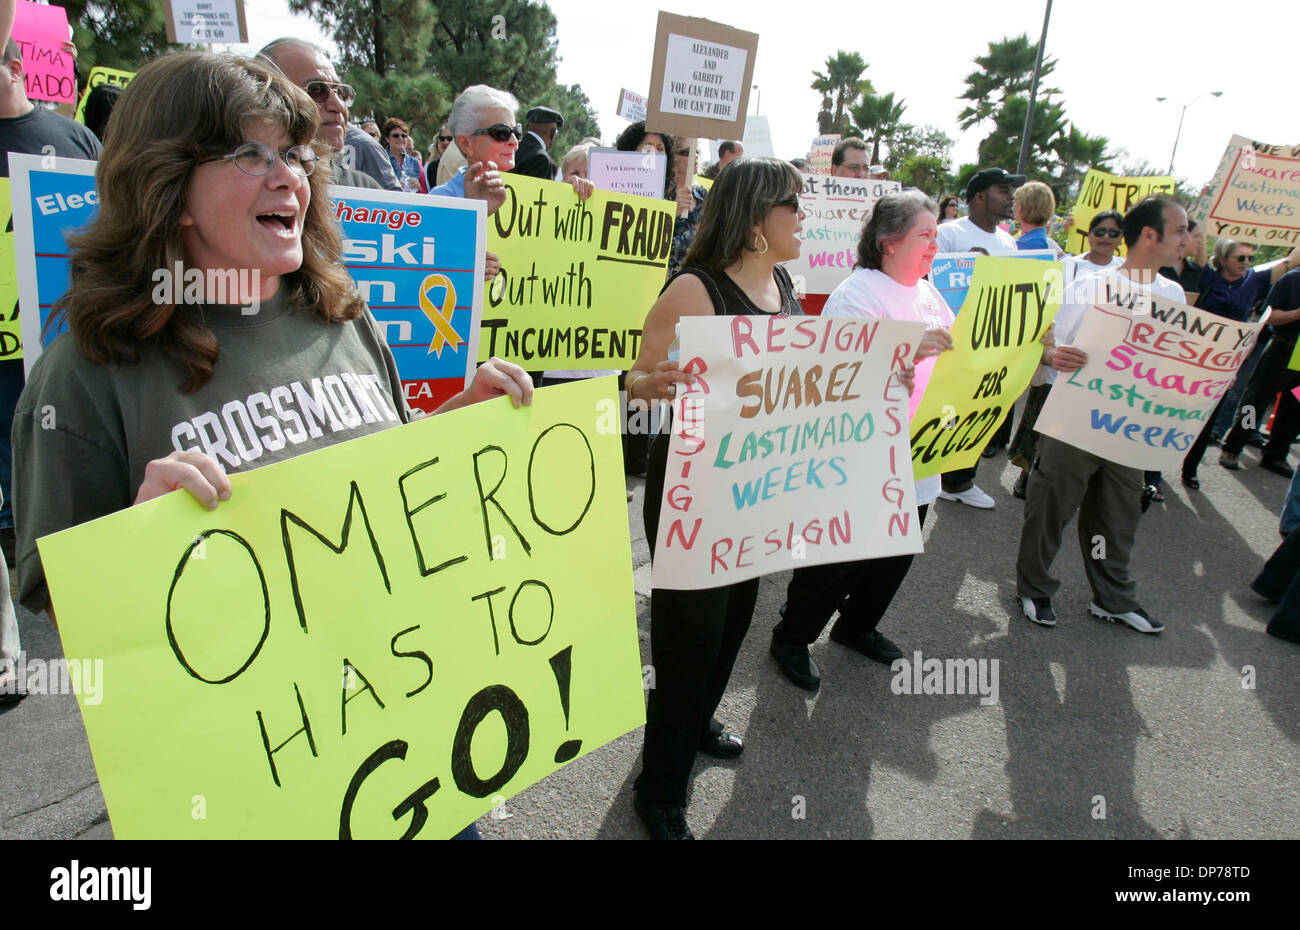 Jul 03, 2006; San Diego, CA, USA; At left, KAREN CLIFFE held her sign during a faculty rally at Grossmont College demanding resignation of Grossmont-Cuyamaca Chancellor Omero Suarez for altering his contract without board approval; resignation of other officials involved also; including board president Deanna Weeks and vice chancellor human resources Ben Lastimado.  Mandatory Credi Stock Photo